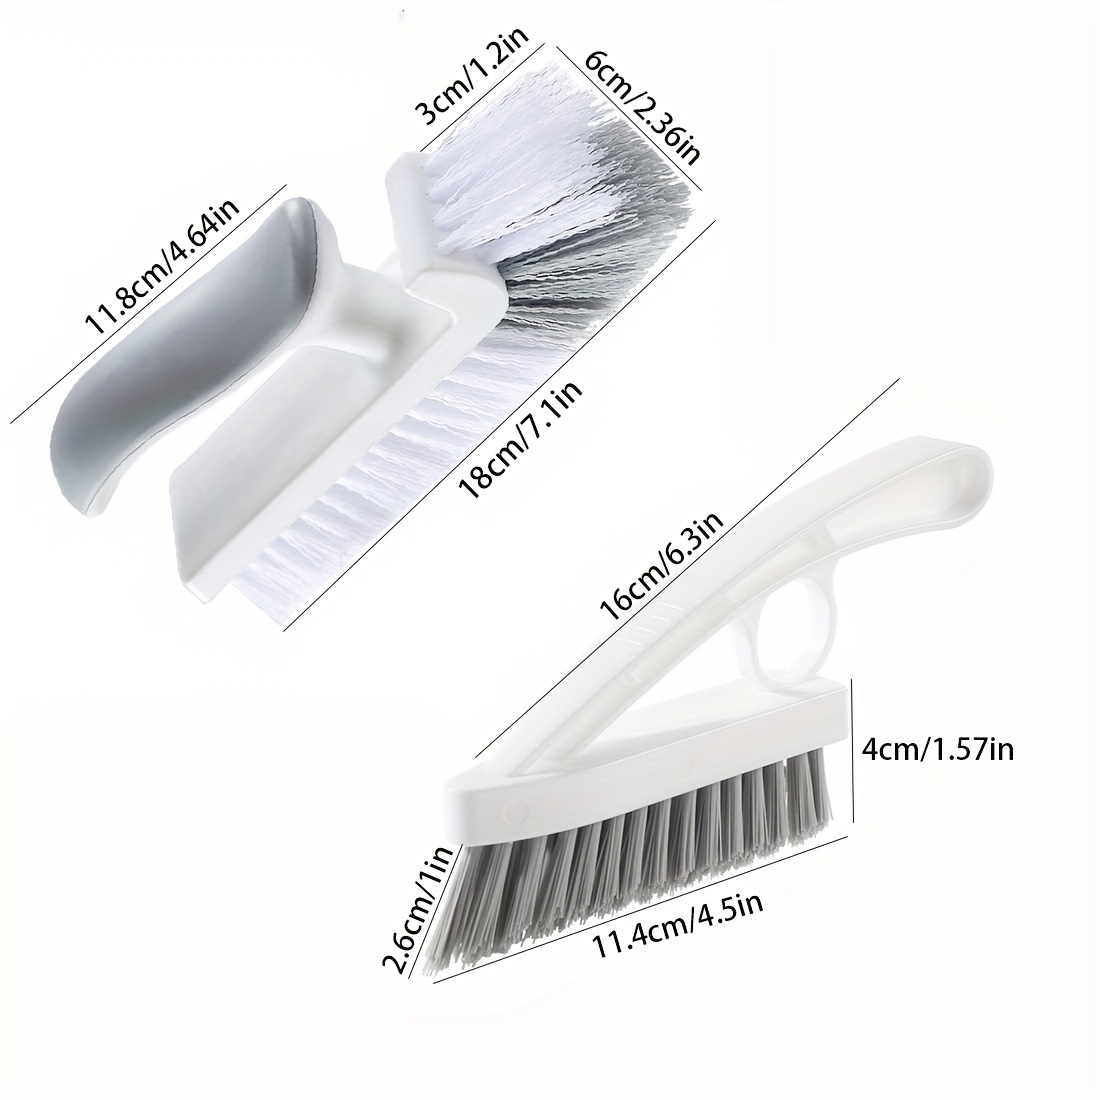 Hard-Bristled Crevice Cleaning Brush, Grout Cleaner Scrub Brush